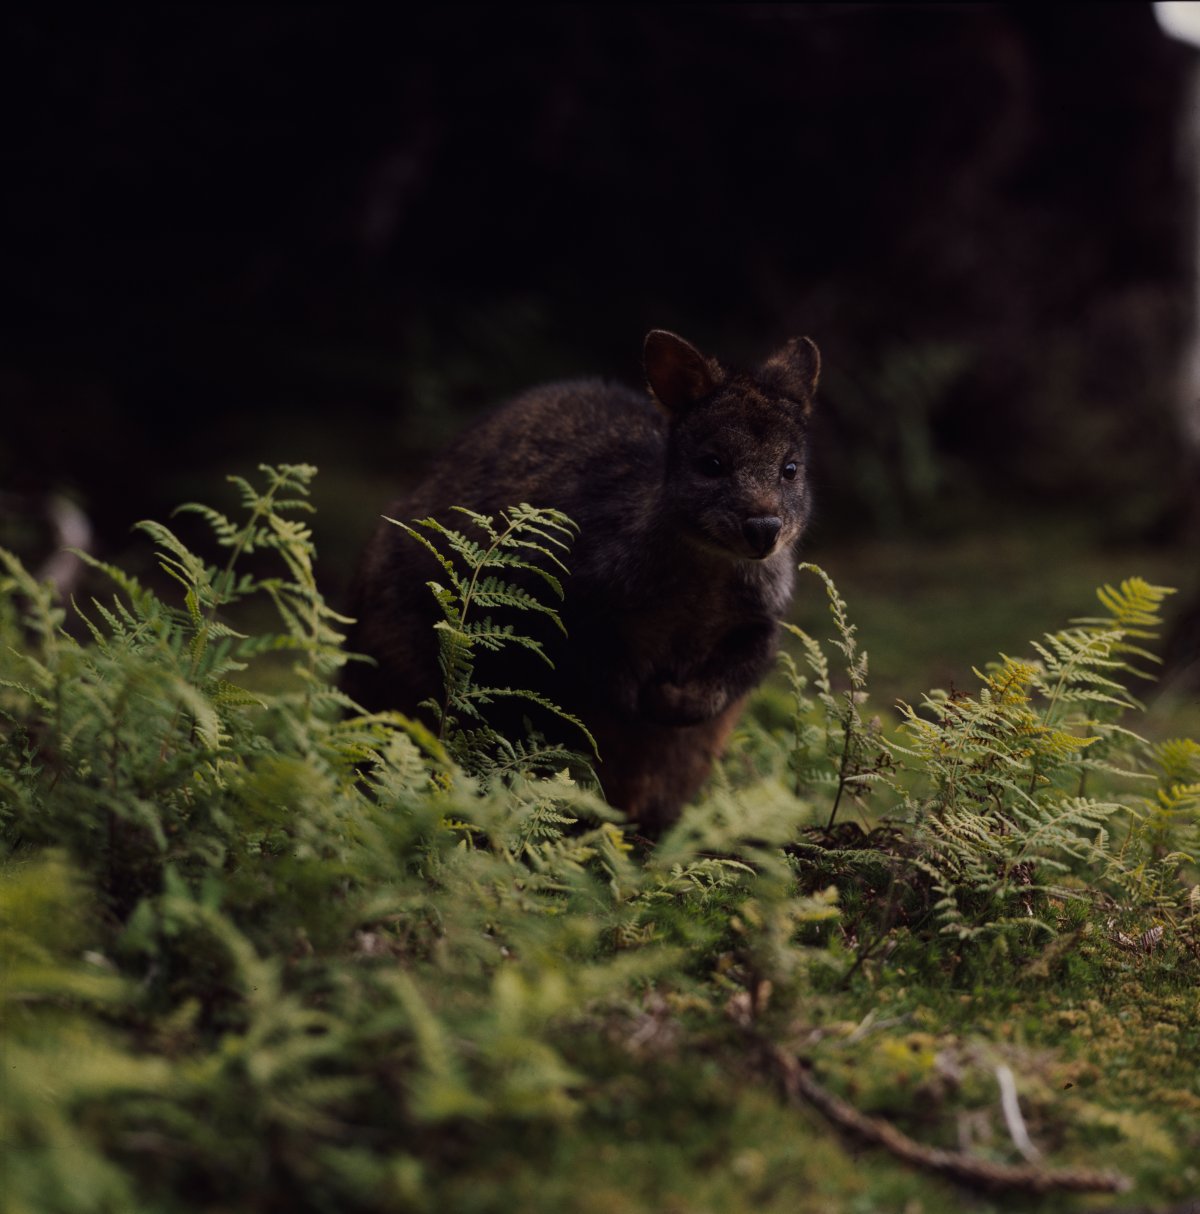 A small black/brown wallaby sits among ferns. The wallaby blends in with the dark background of the image.